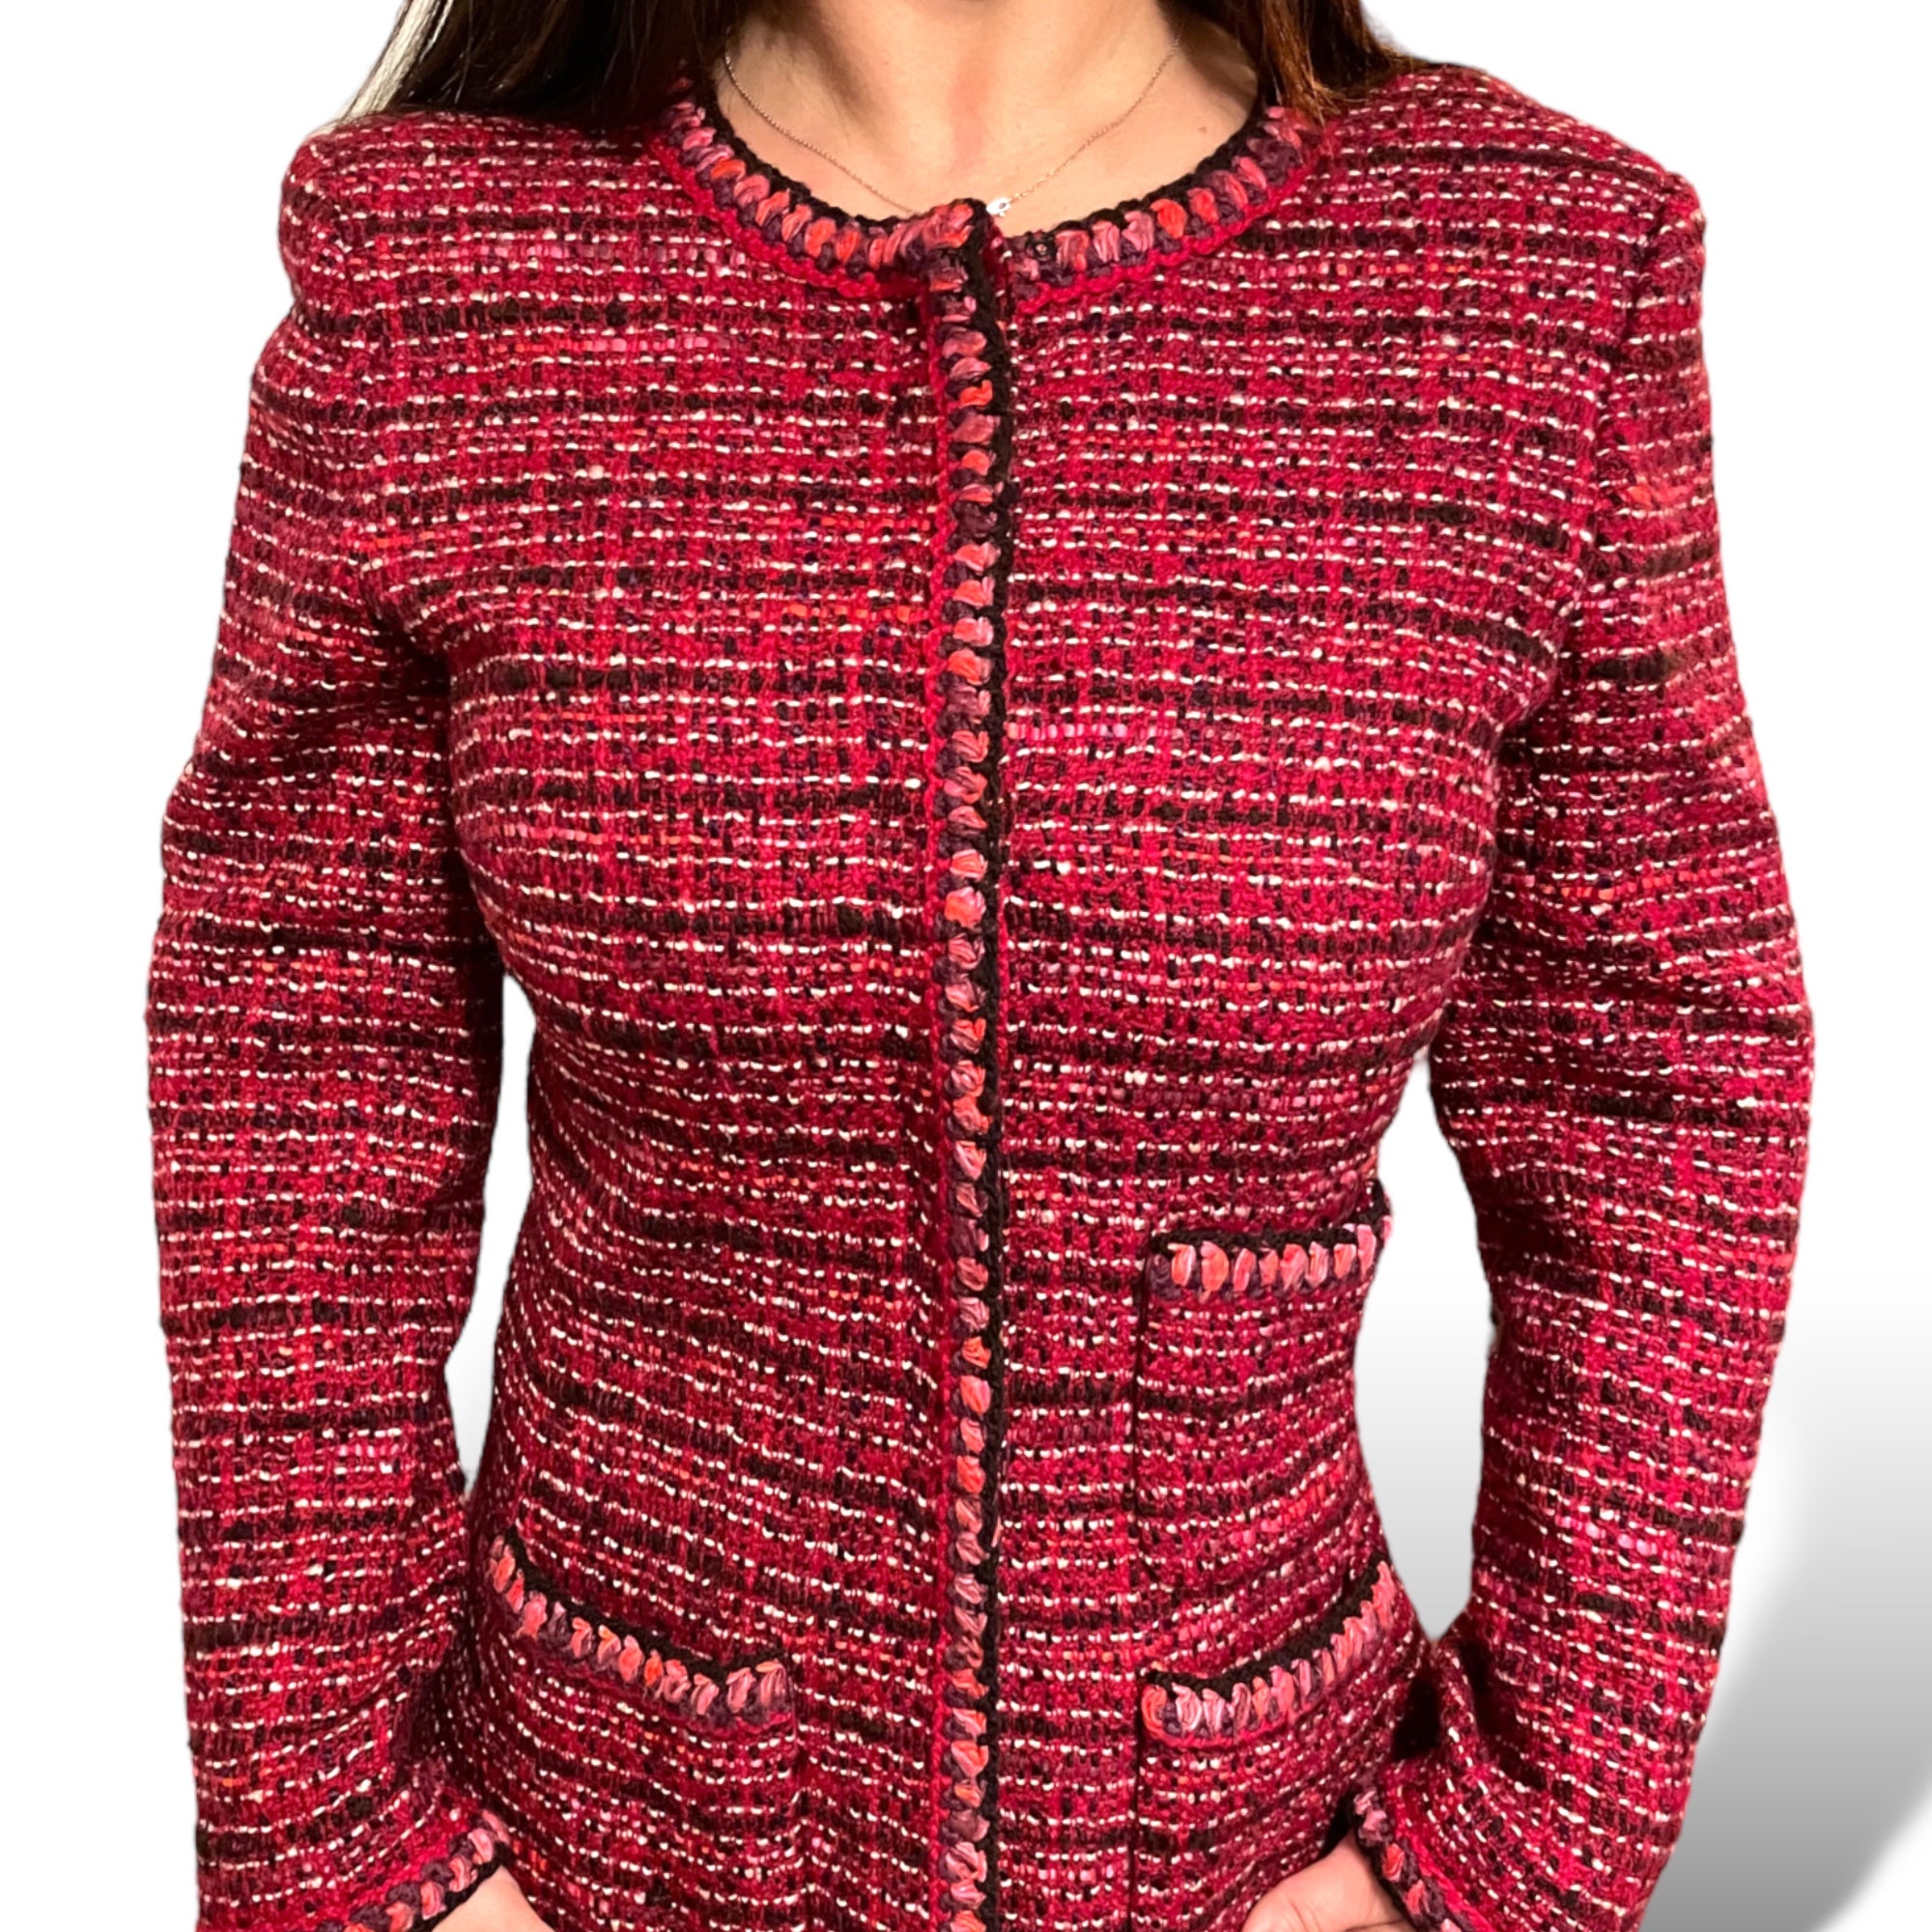 CHANEL Vintage FALL 2001 Collection Burgundy Tweed Patterned Jacket